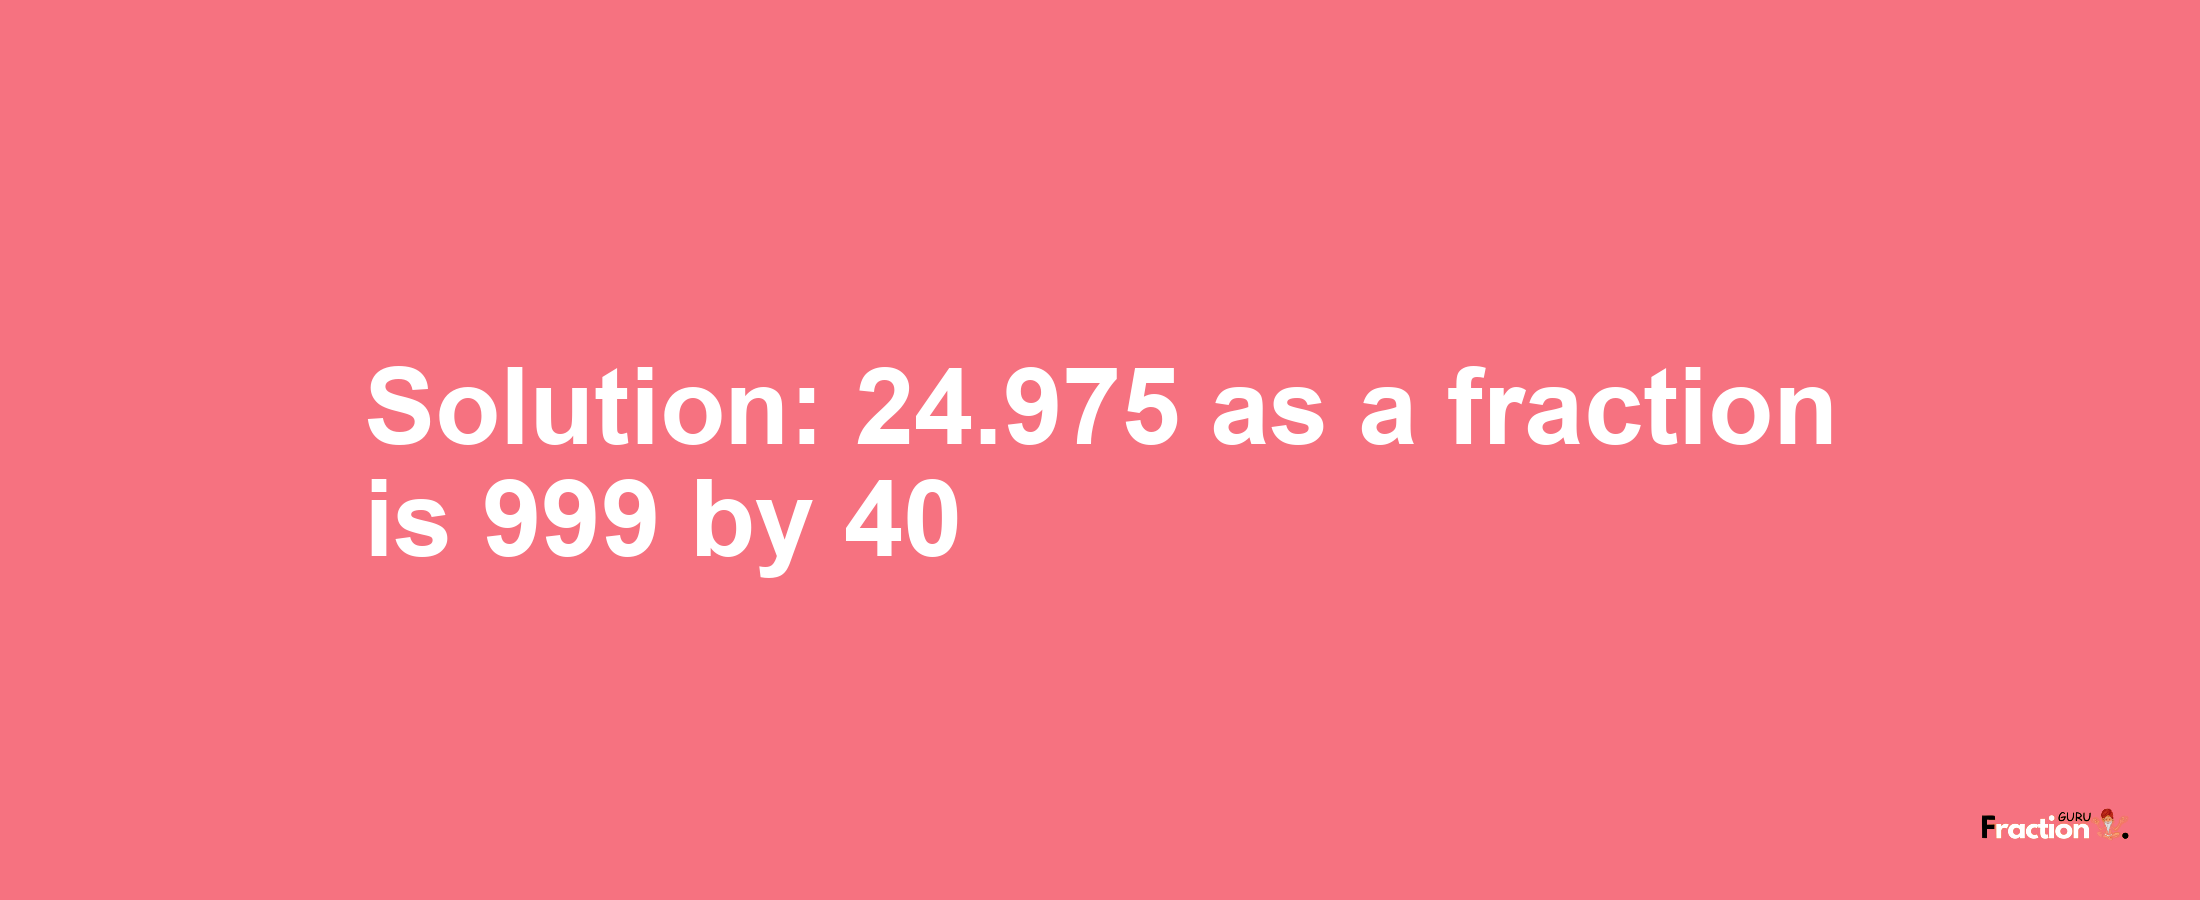 Solution:24.975 as a fraction is 999/40